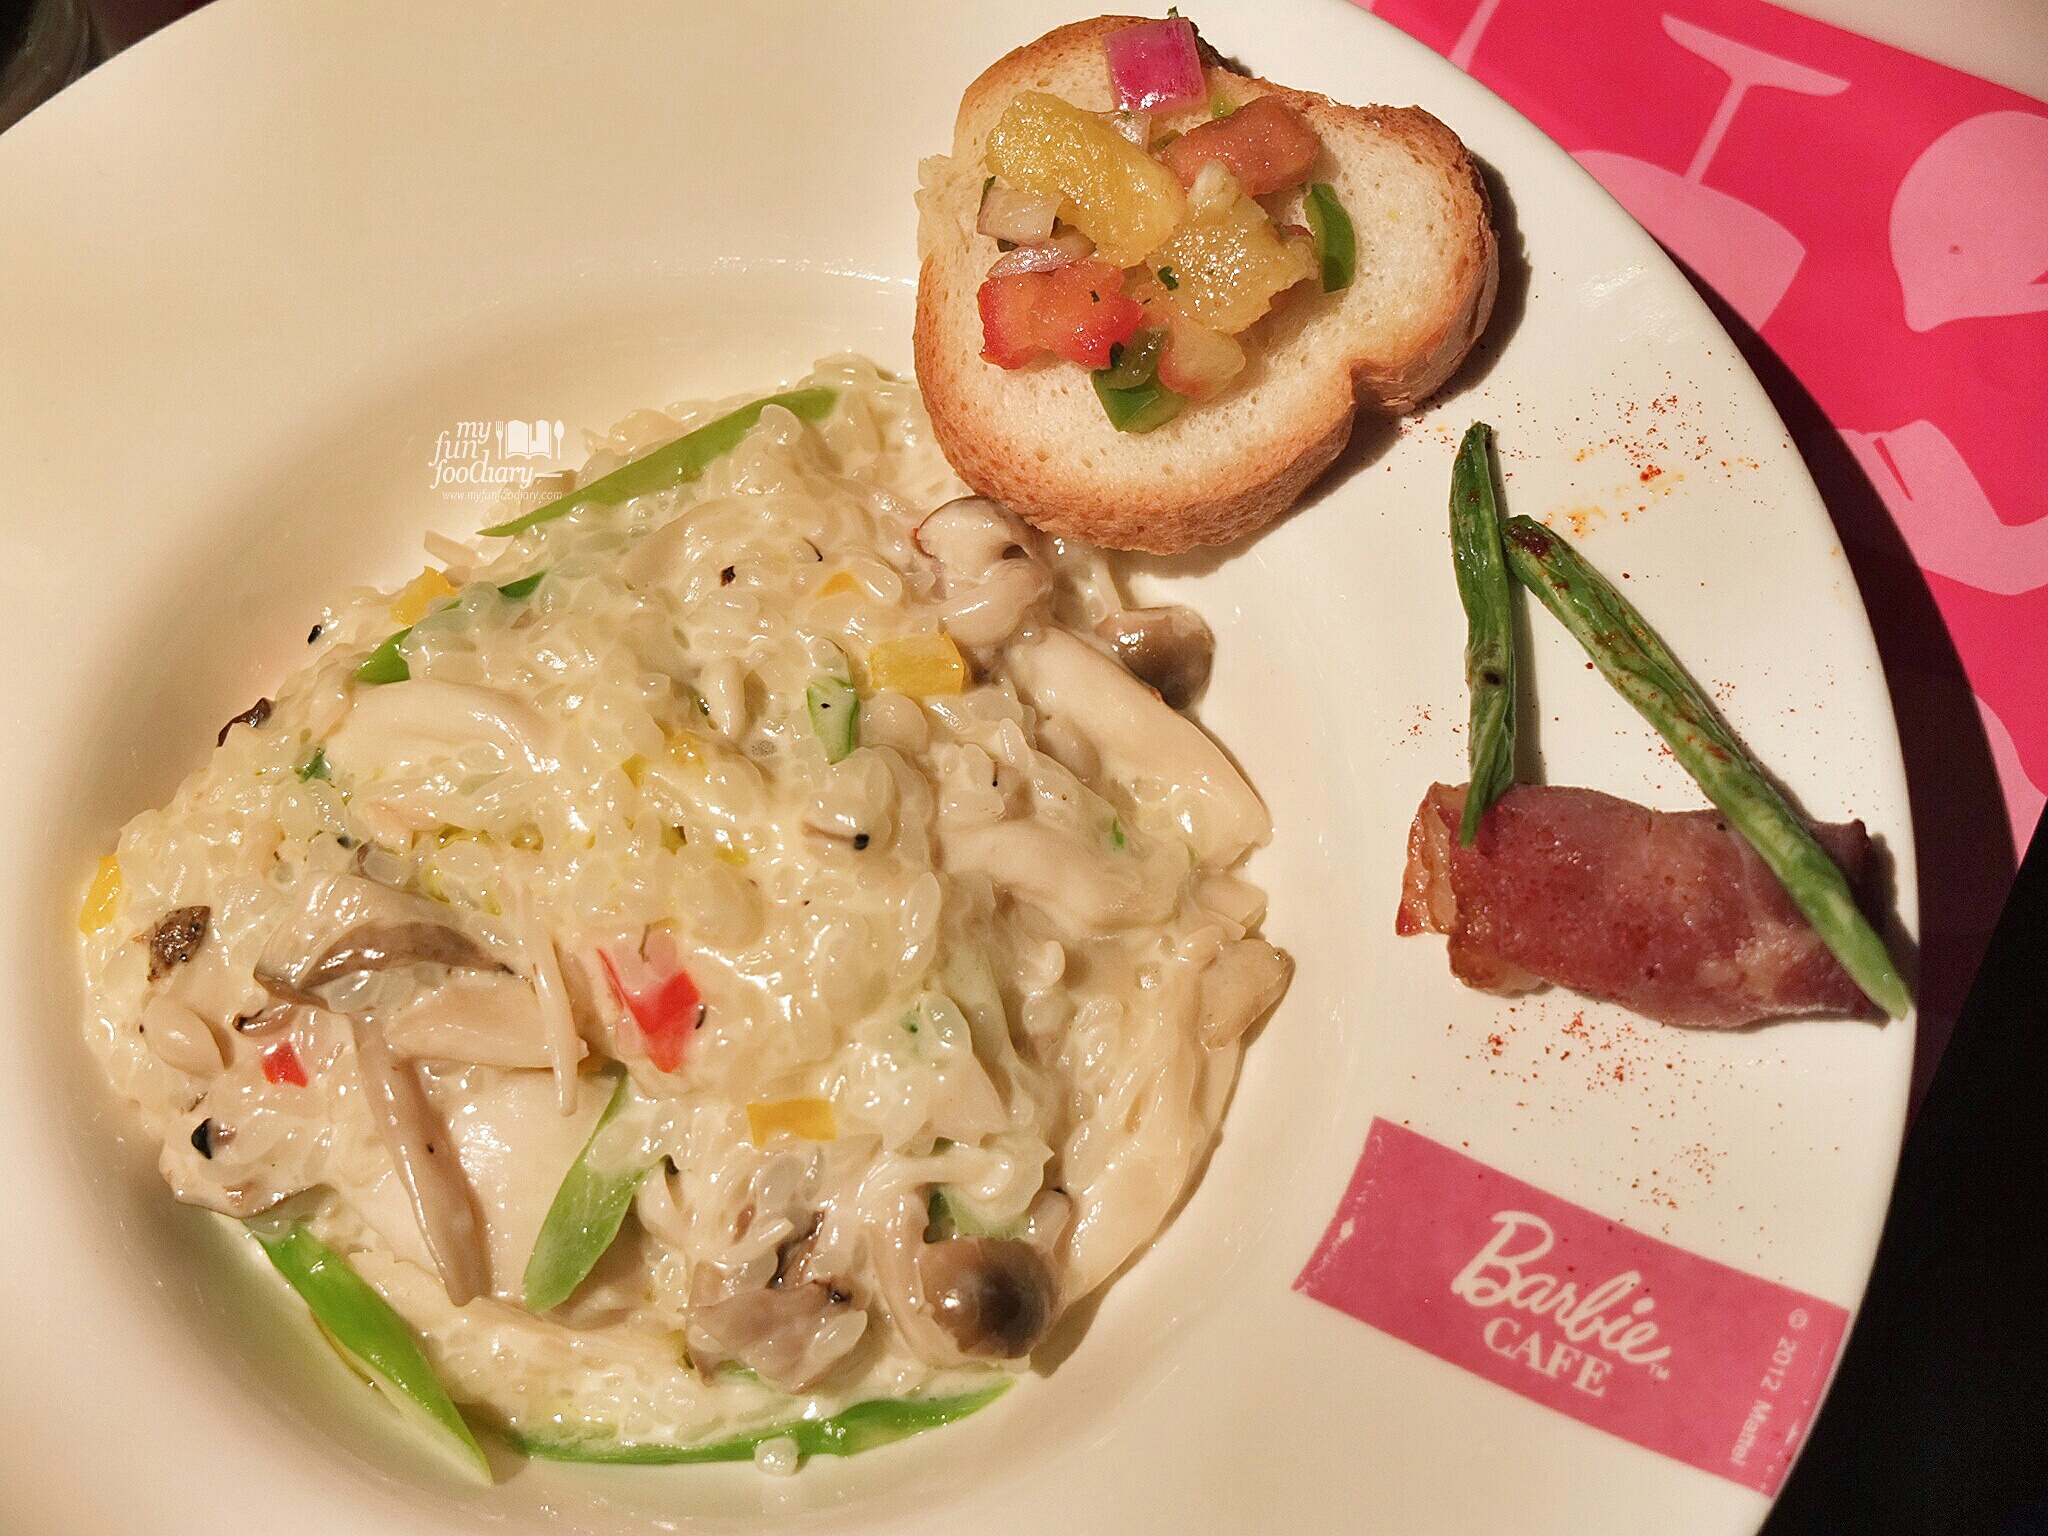 Risotto Asparagus Mushroom at Barbie Cafe Taiwan by Myfunfoodiary